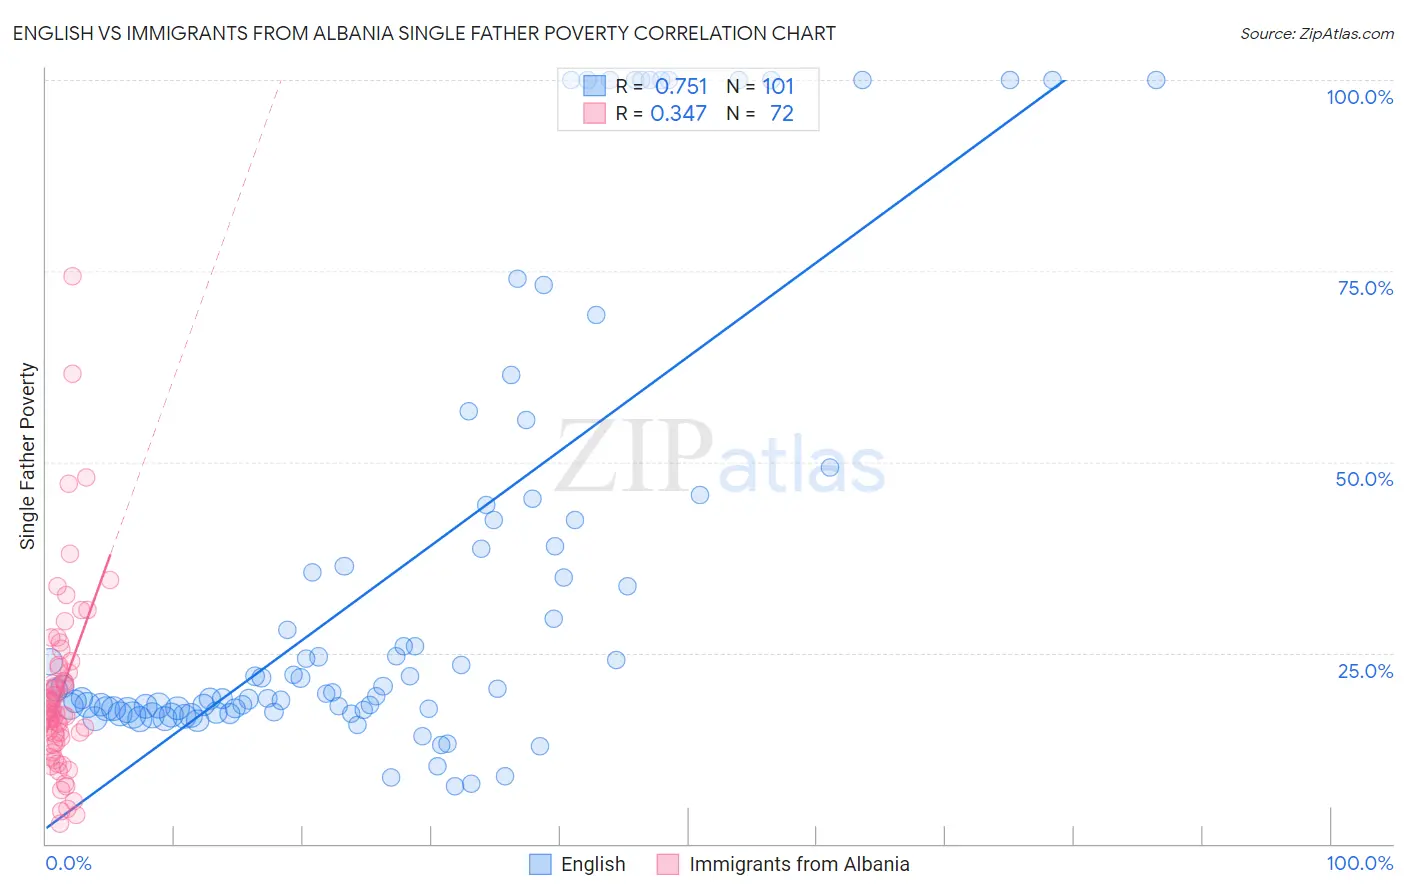 English vs Immigrants from Albania Single Father Poverty